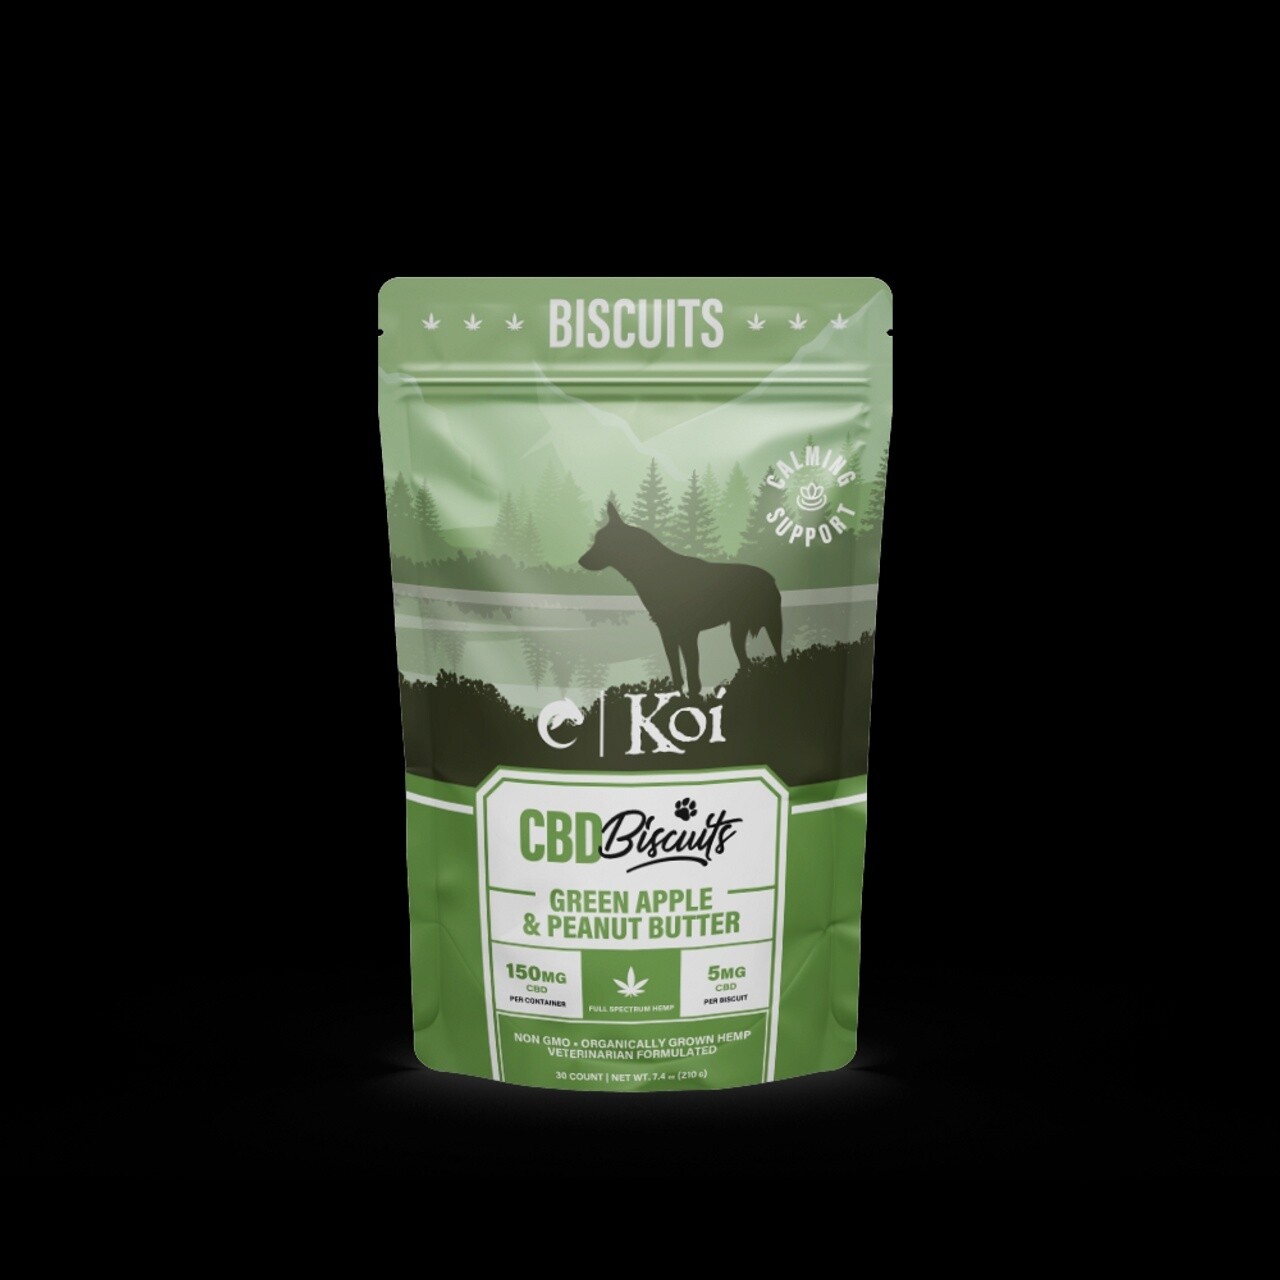 Koi 150mg CBD Biscuits for Dogs